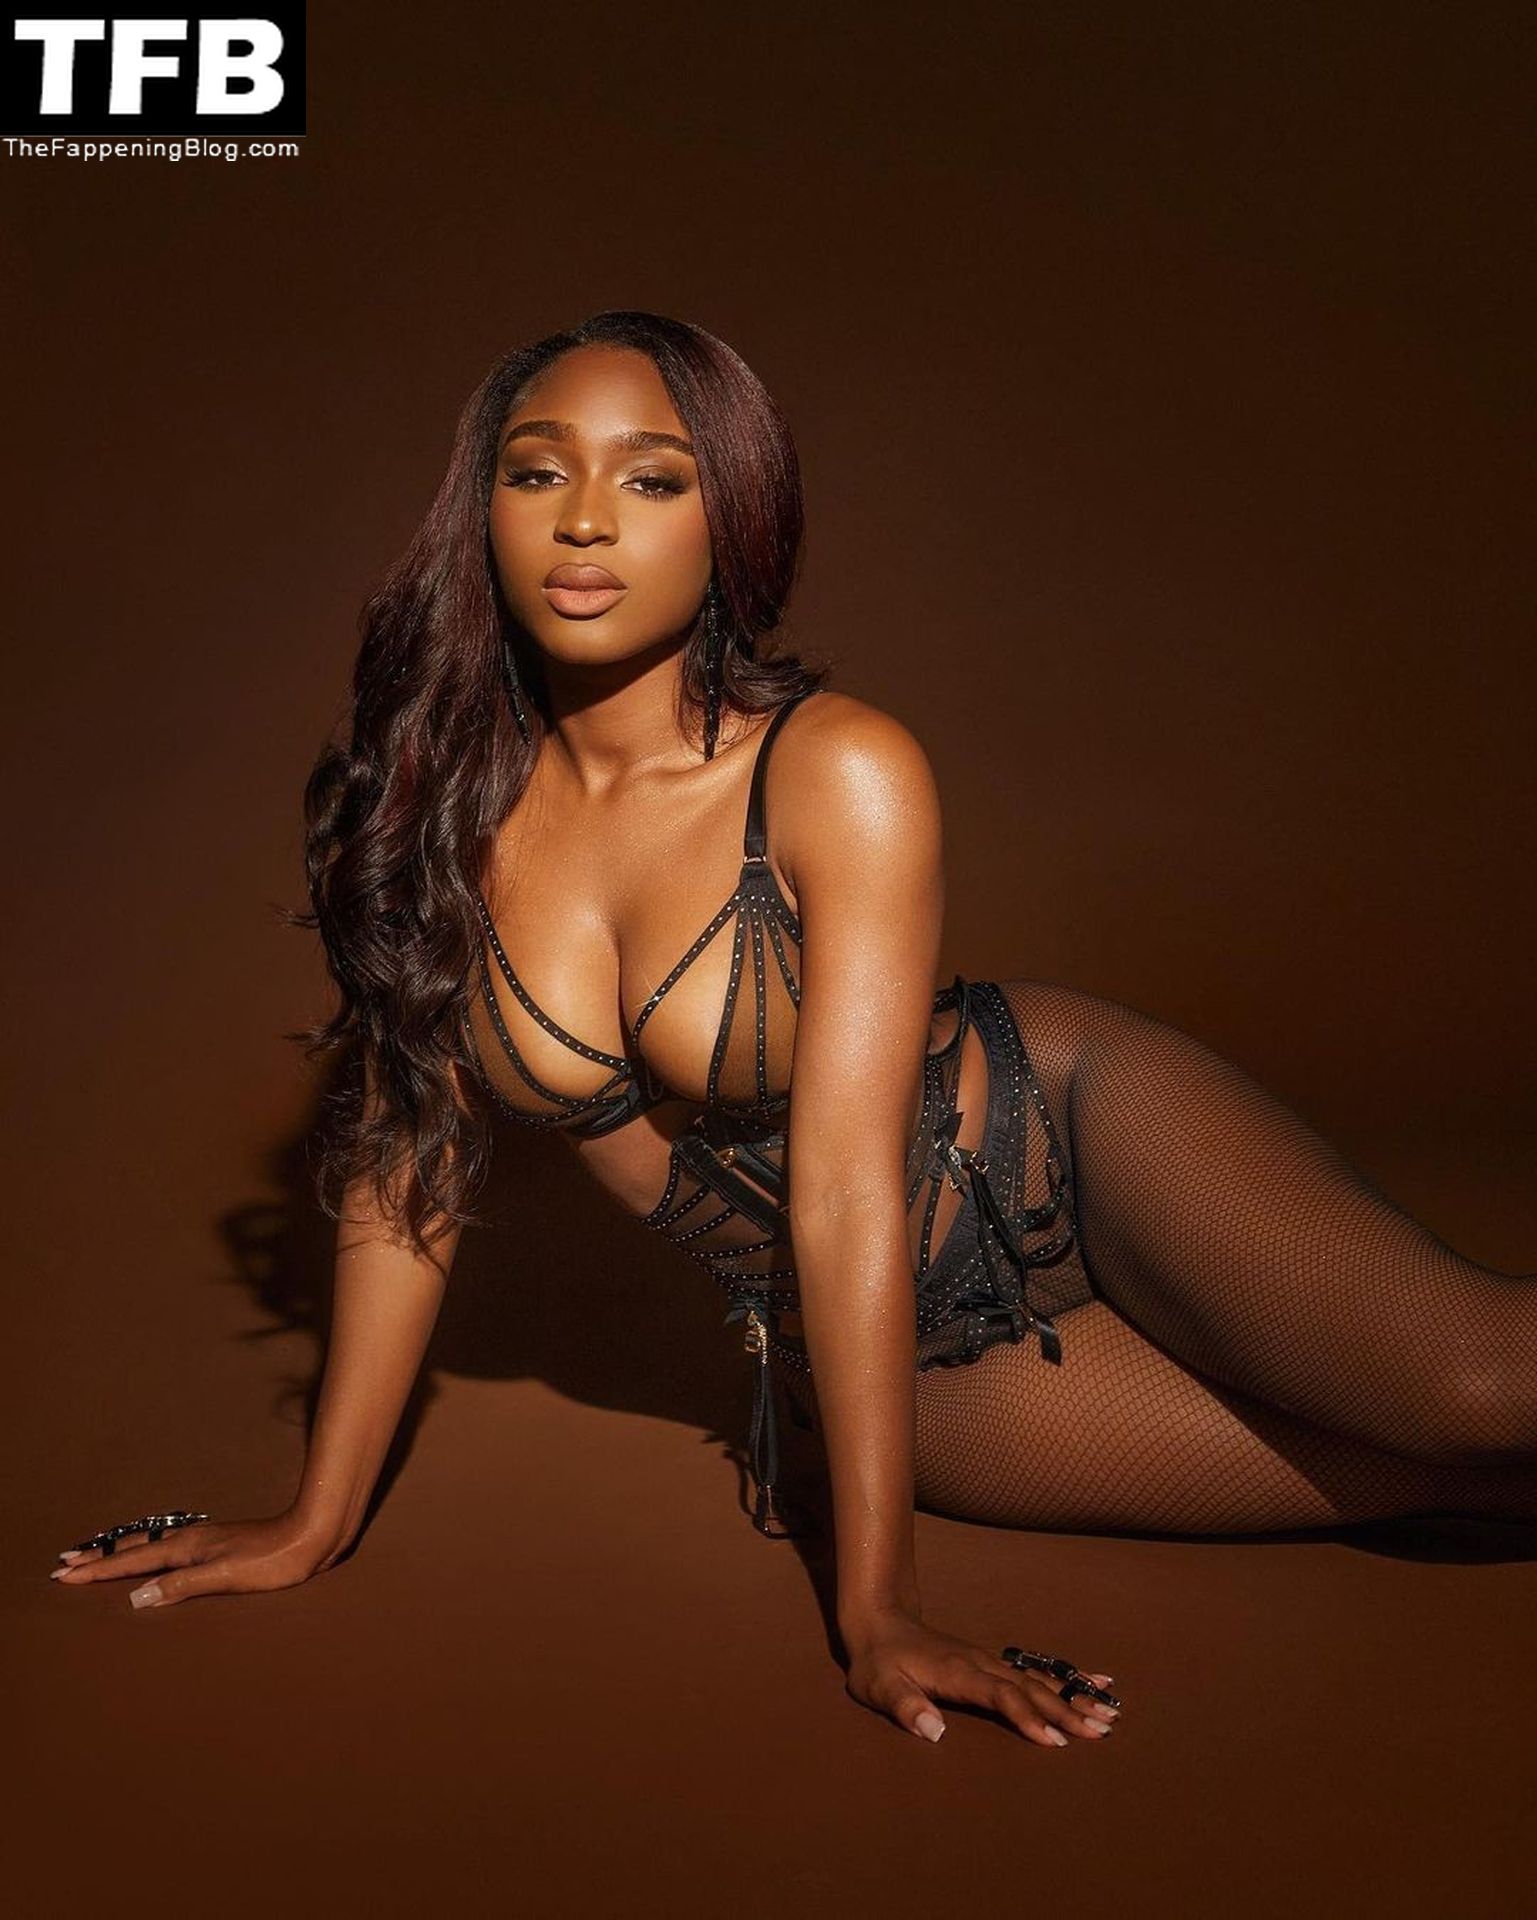 Normani Kordei Sexy Lingerie 4 1 thefappeningblog.com  - Normani Poses in Lingerie (7 Photos)